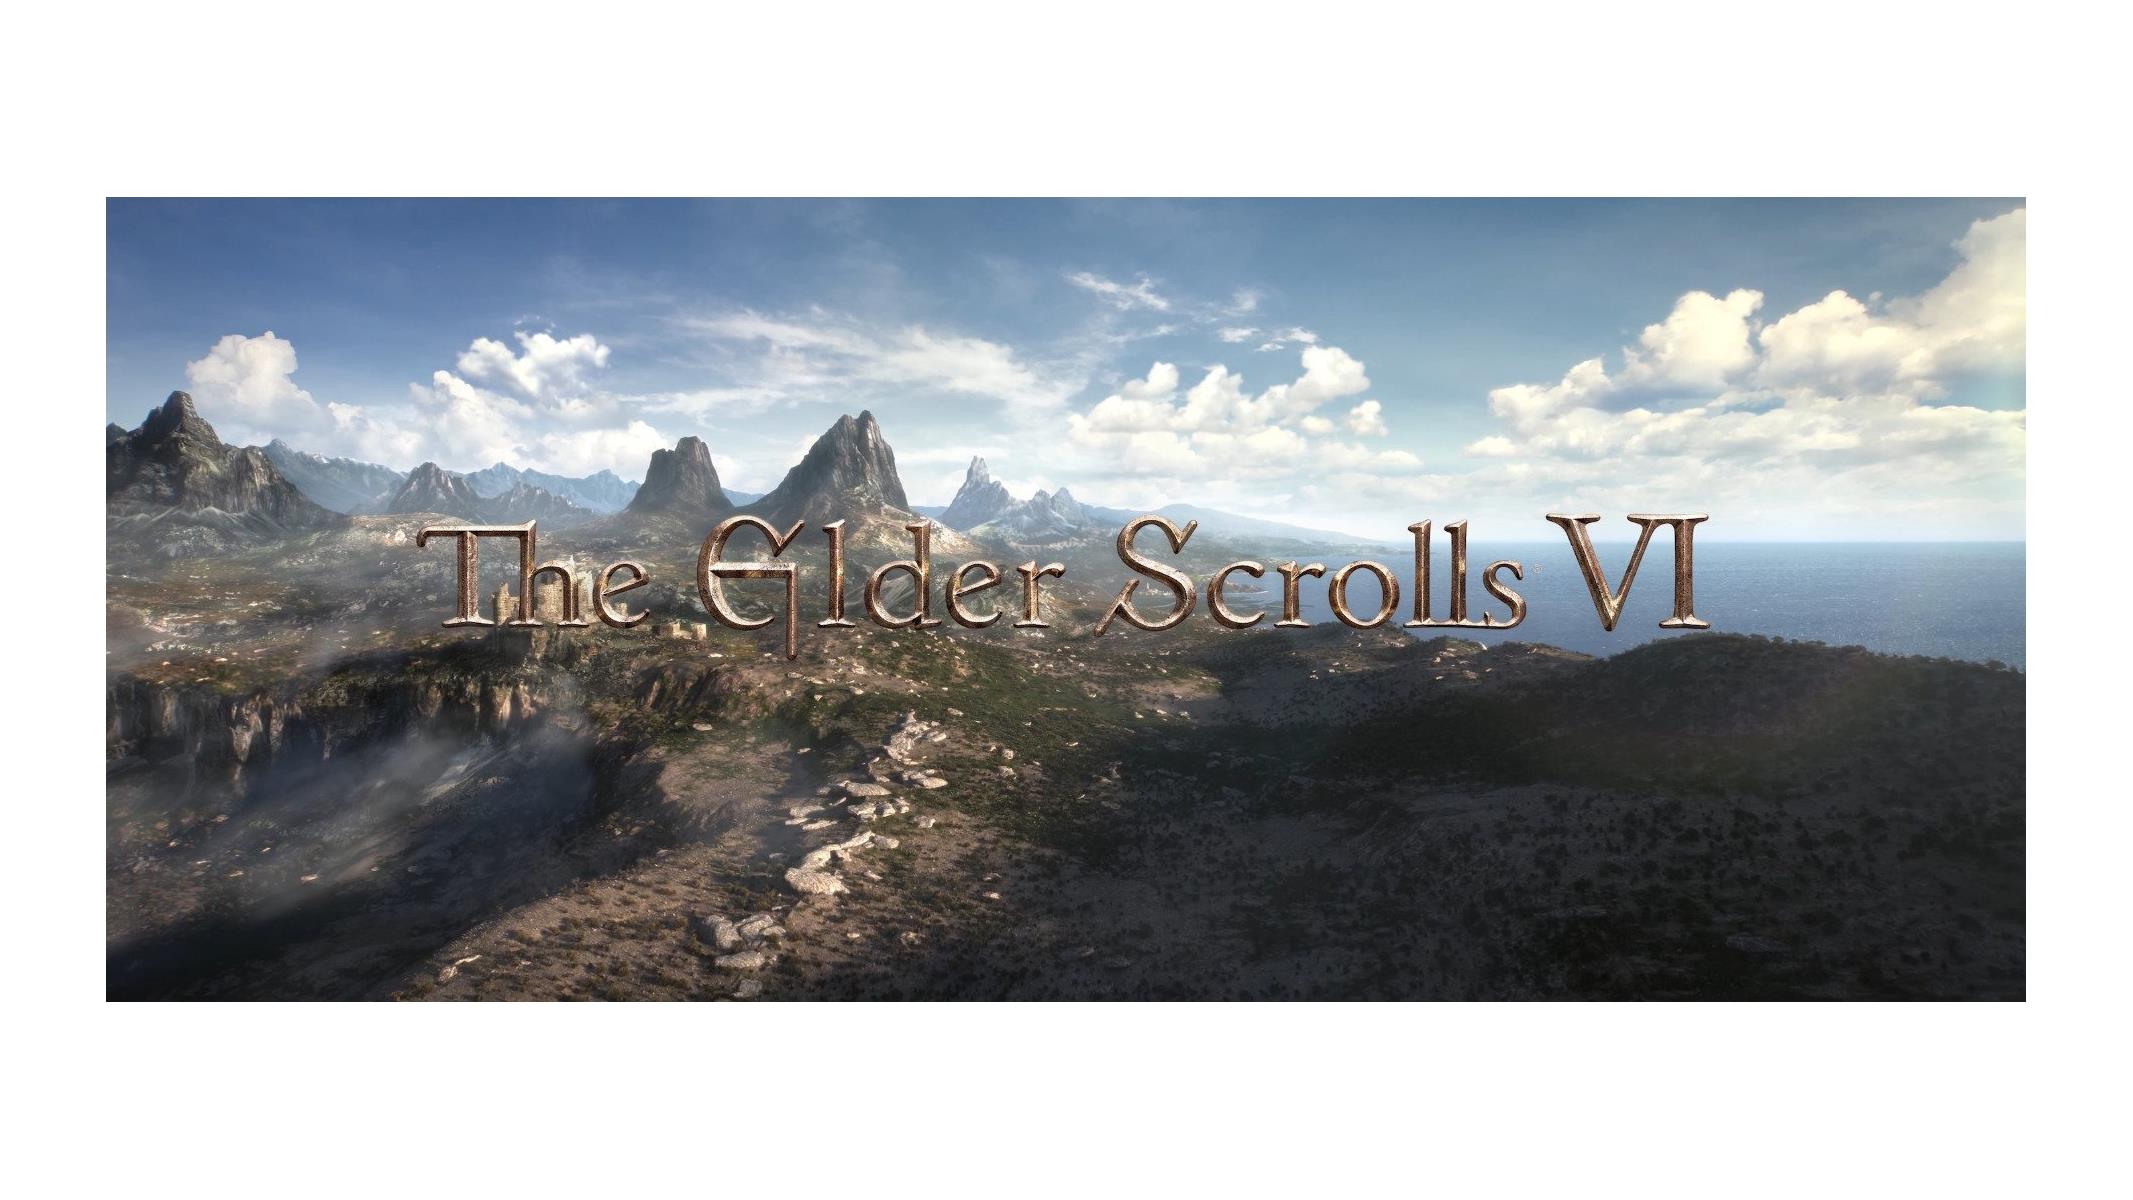 The Elder Scrolls 6 officially announced by Bethesda at E3 2018